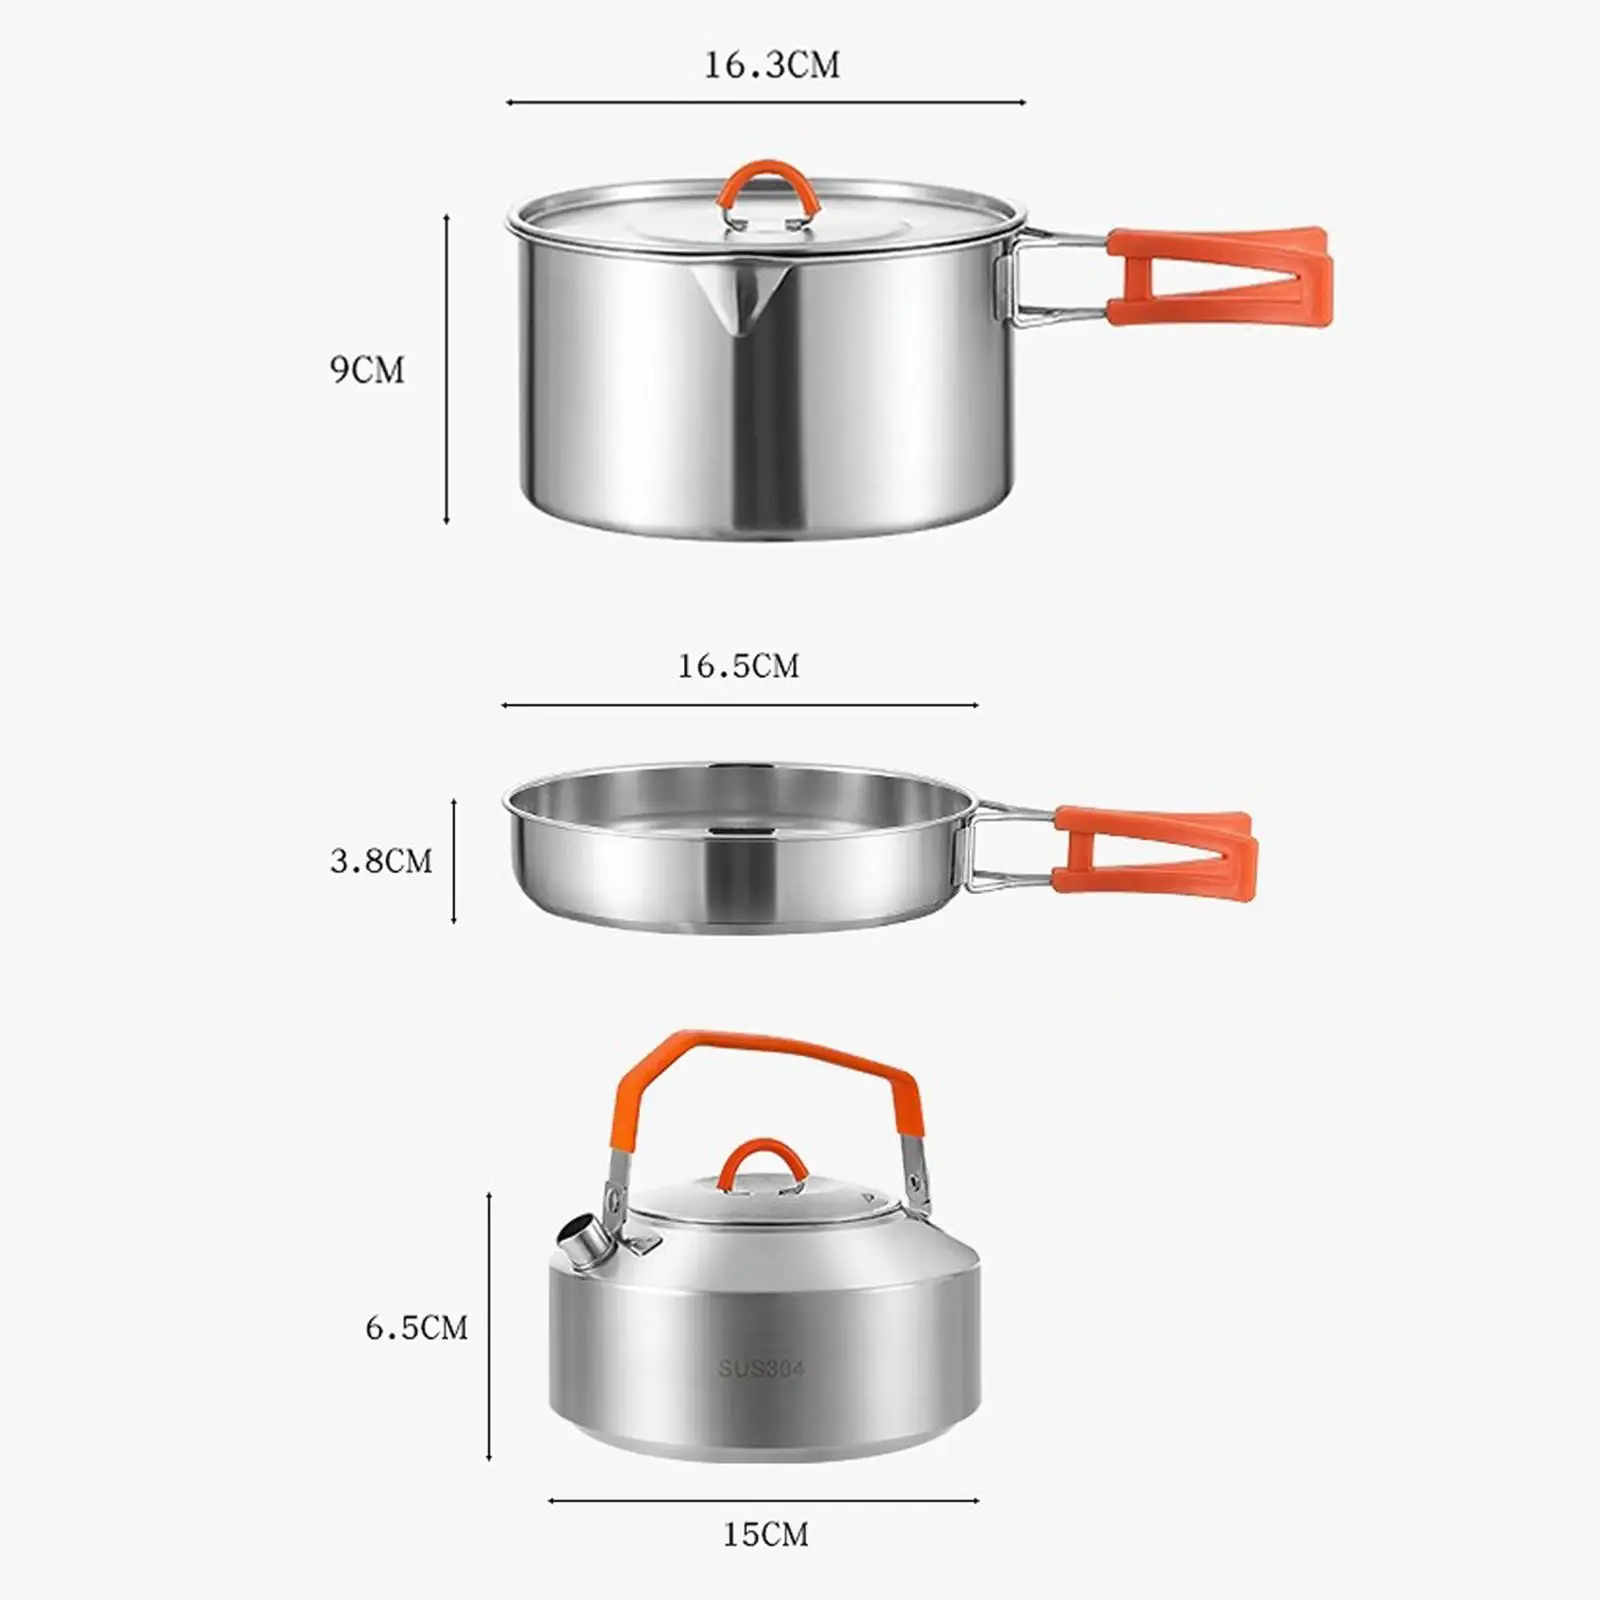 Camping Cookware Stainless Steel with Folding Handles Portable 3Pcs/Set Camping